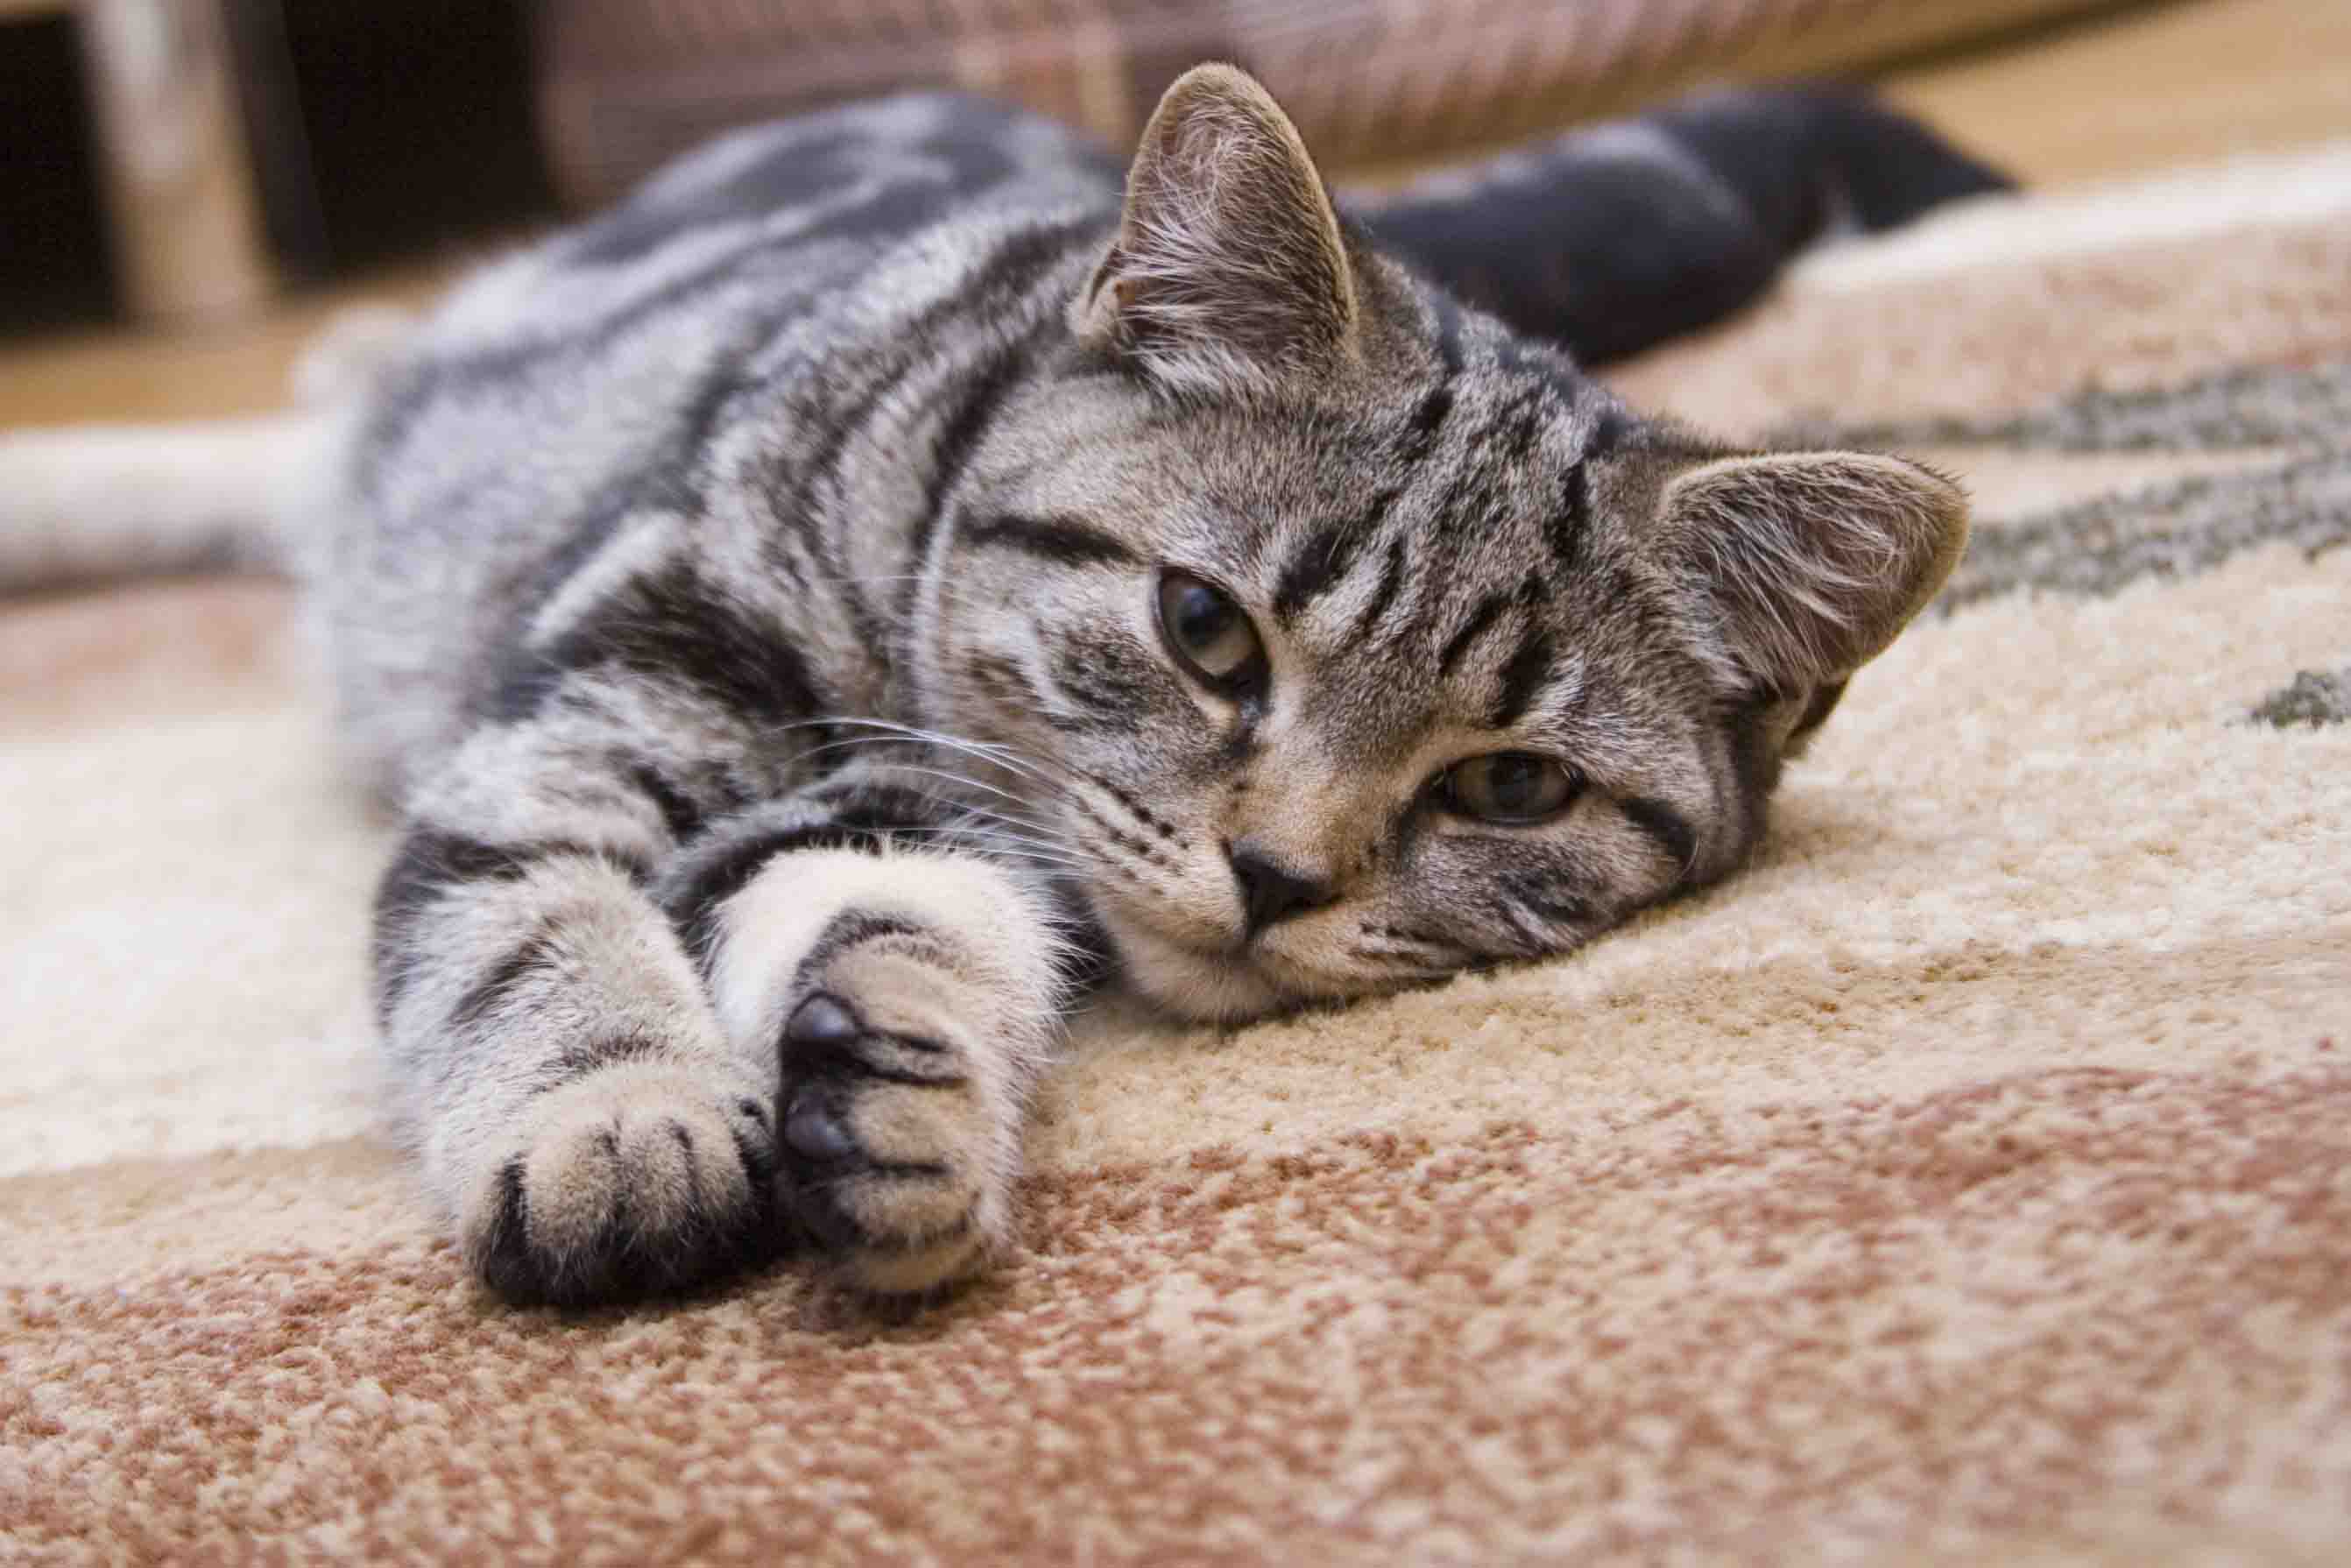 How To Keep Cats From Scratching Rugs | Storables